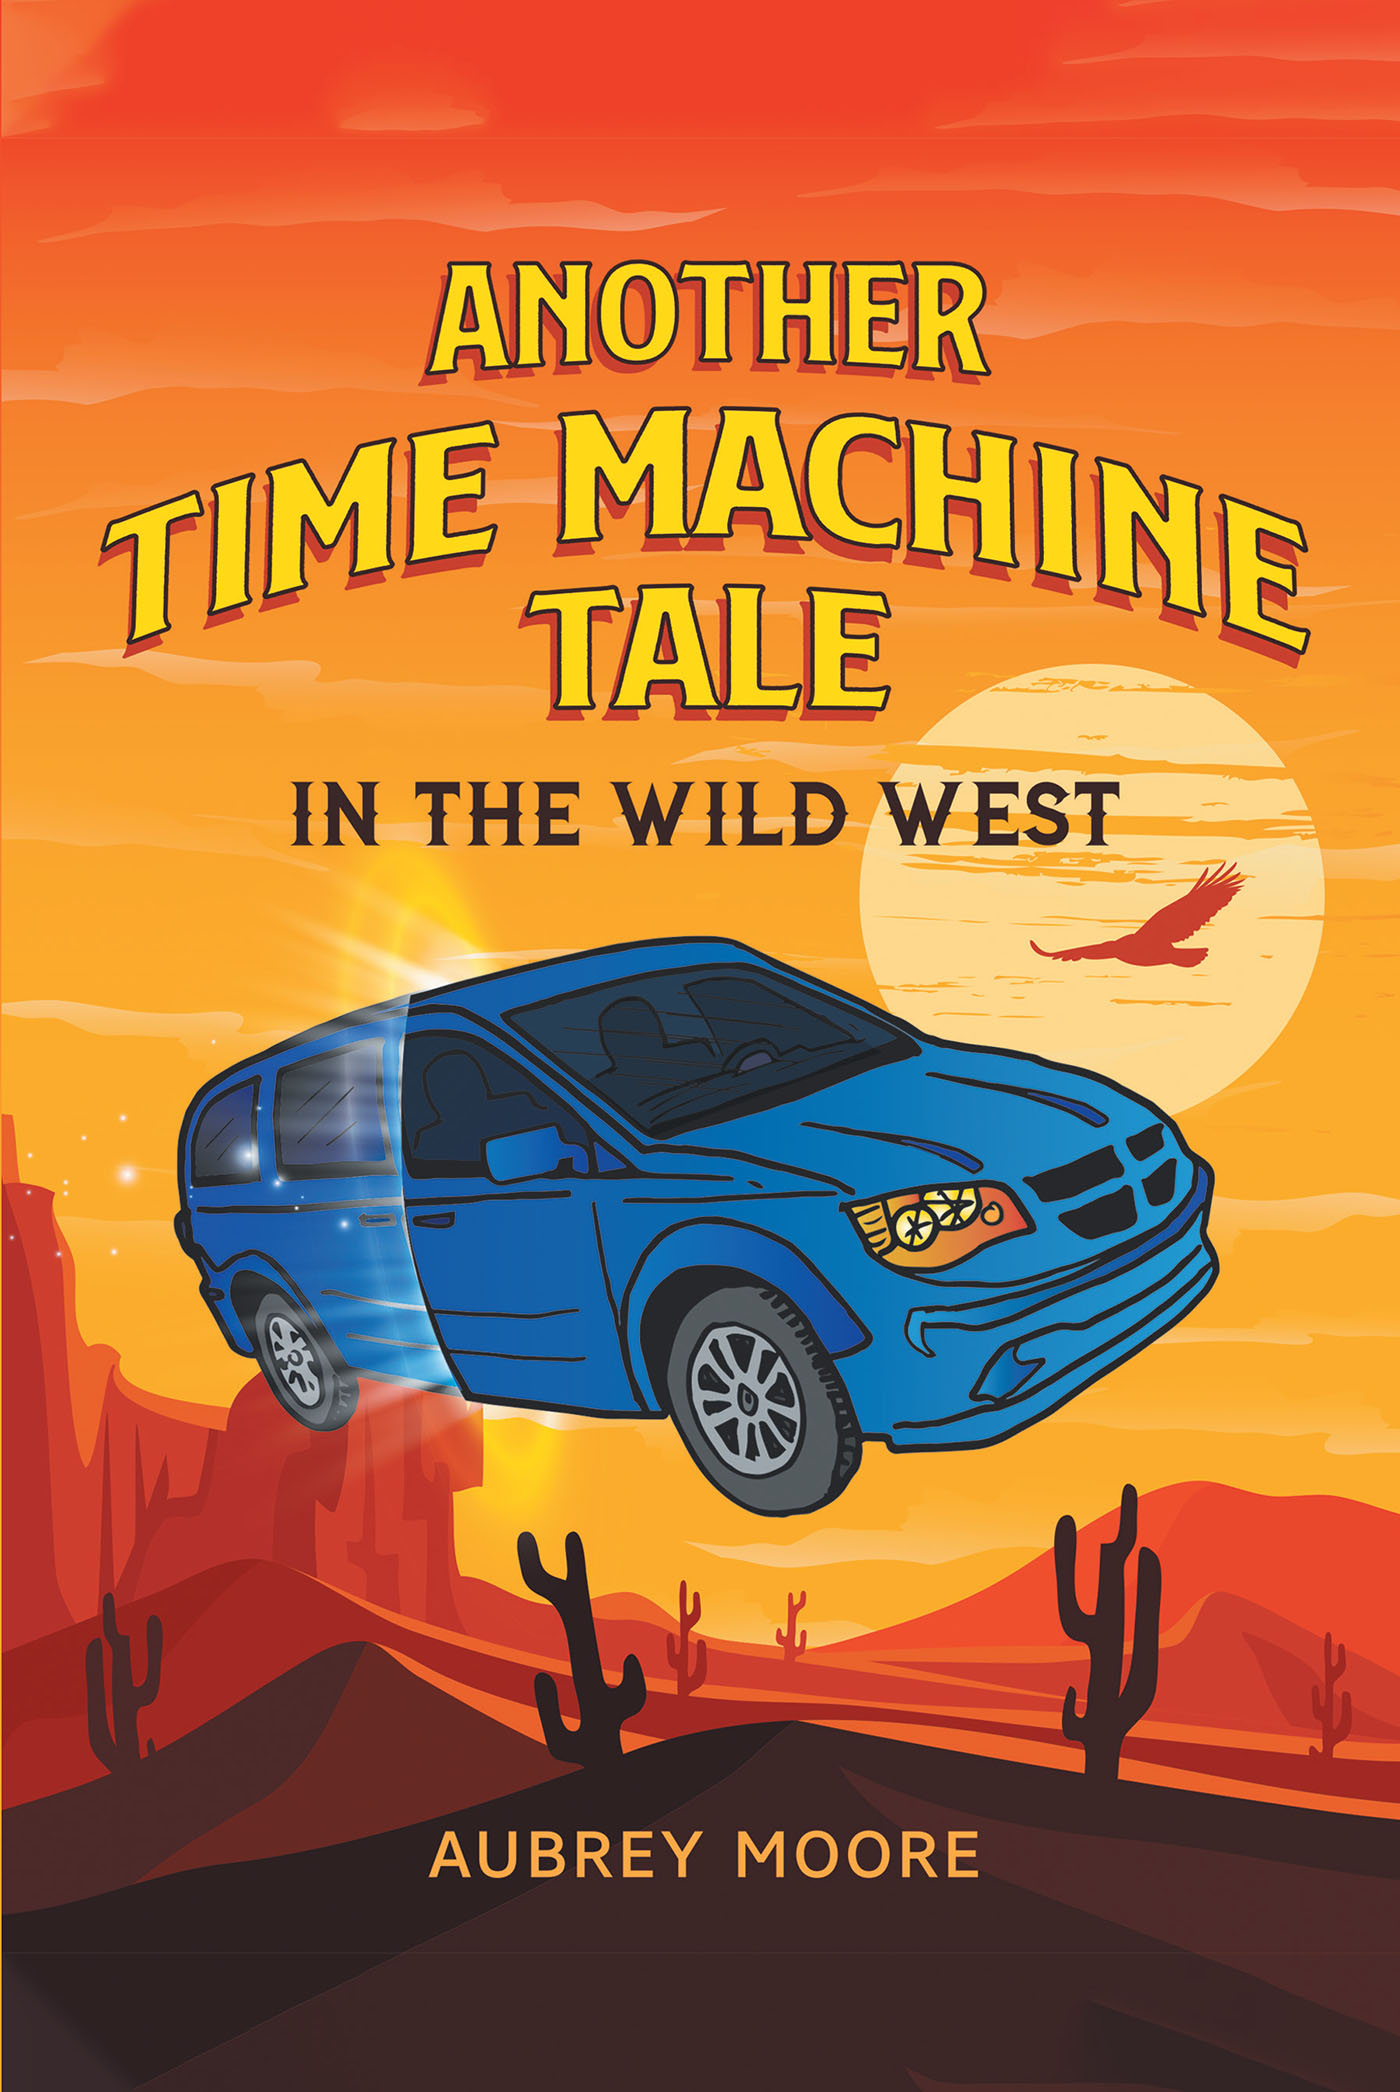 Author Aubrey Moore’s New Book, "Another Time Machine Tale: In the Wild West," is a Fascinating Tale That Follows to Friends on an Adventure Through Time